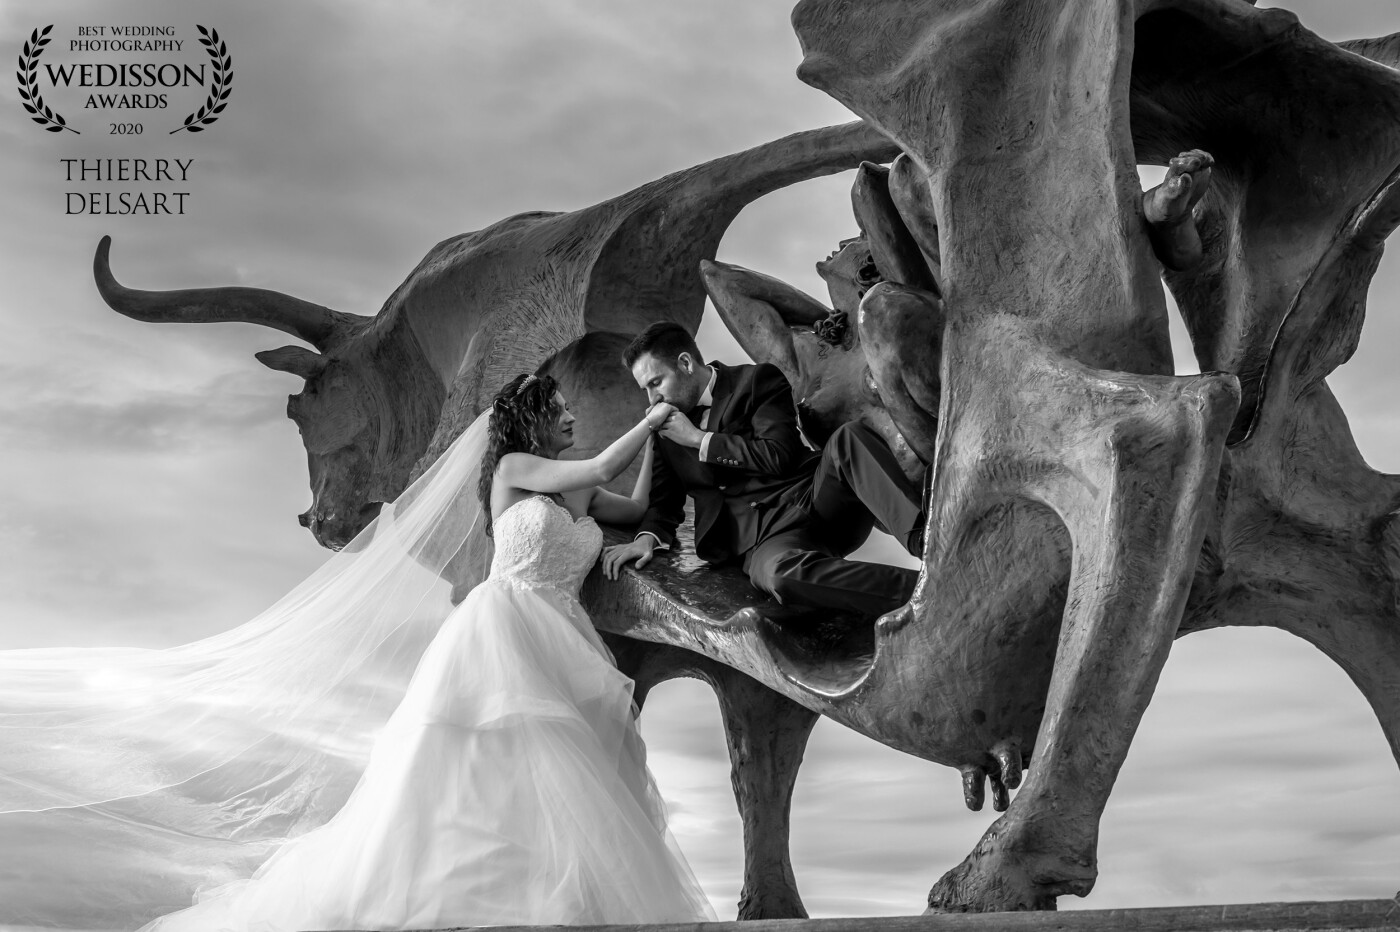 The storm was over the sea and gave us a beautiful sky. A wonderful Pasiphae sculpture is standing at the end of the breakwater ready to receive the groom that wanted to be in the cow's belly. Suddenly the magic happens when all three heads get aligned and the shooting angle gives majesty to it -helped by some sun rays and my flashes. This and all my wedding images would not be possible without the help and soul of my wife Eulàlia, the other photographer half of Mirall de Llum.